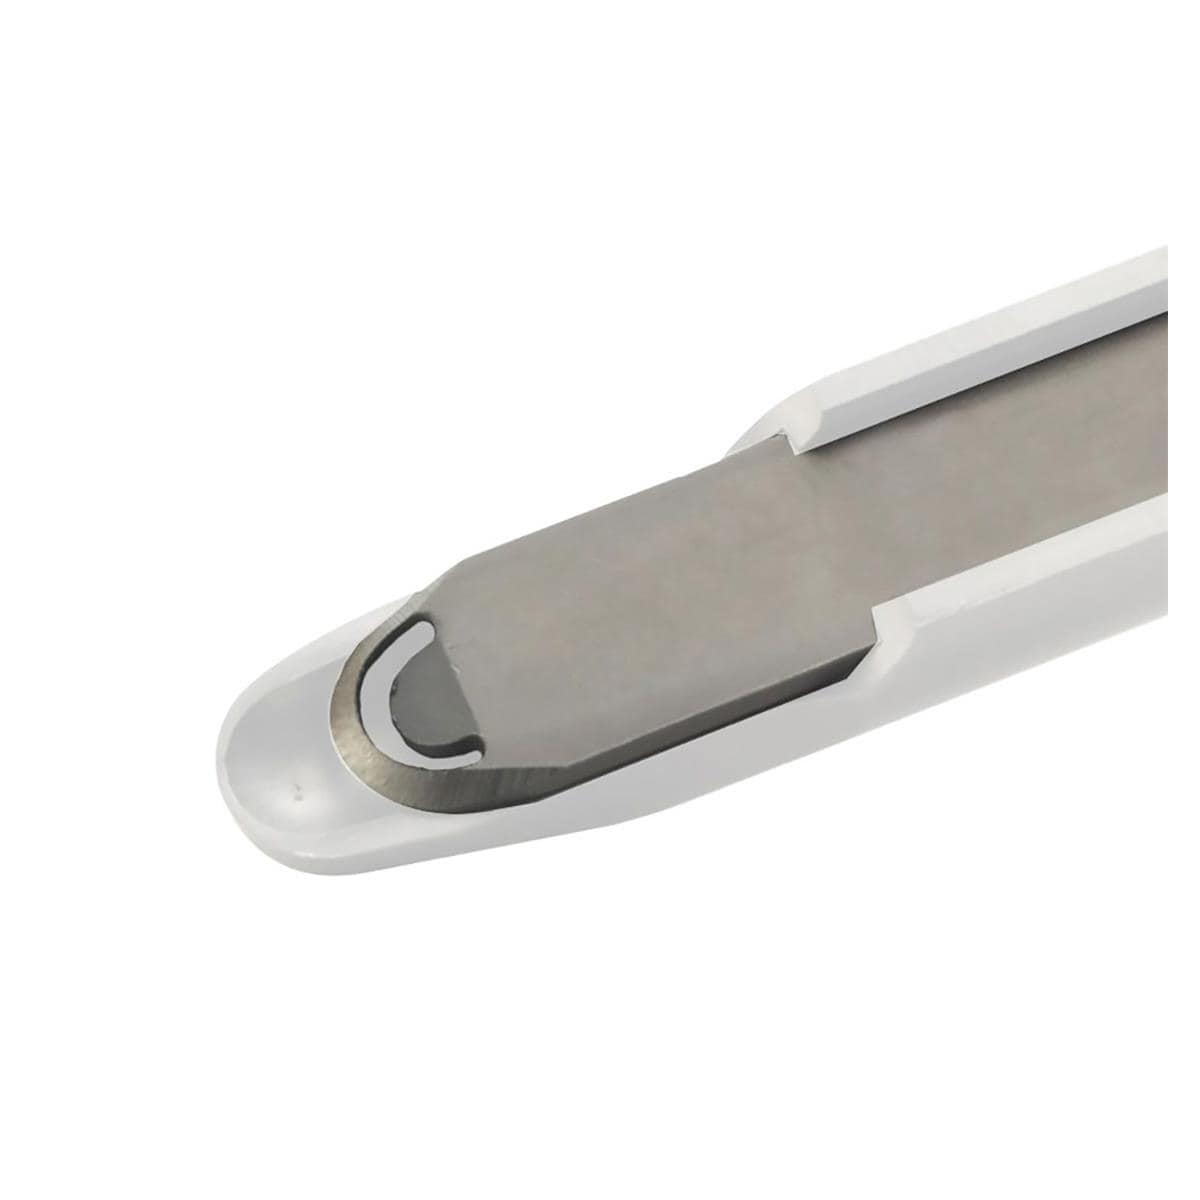 ACE Replacement Blade for Angulated Bone Scraper